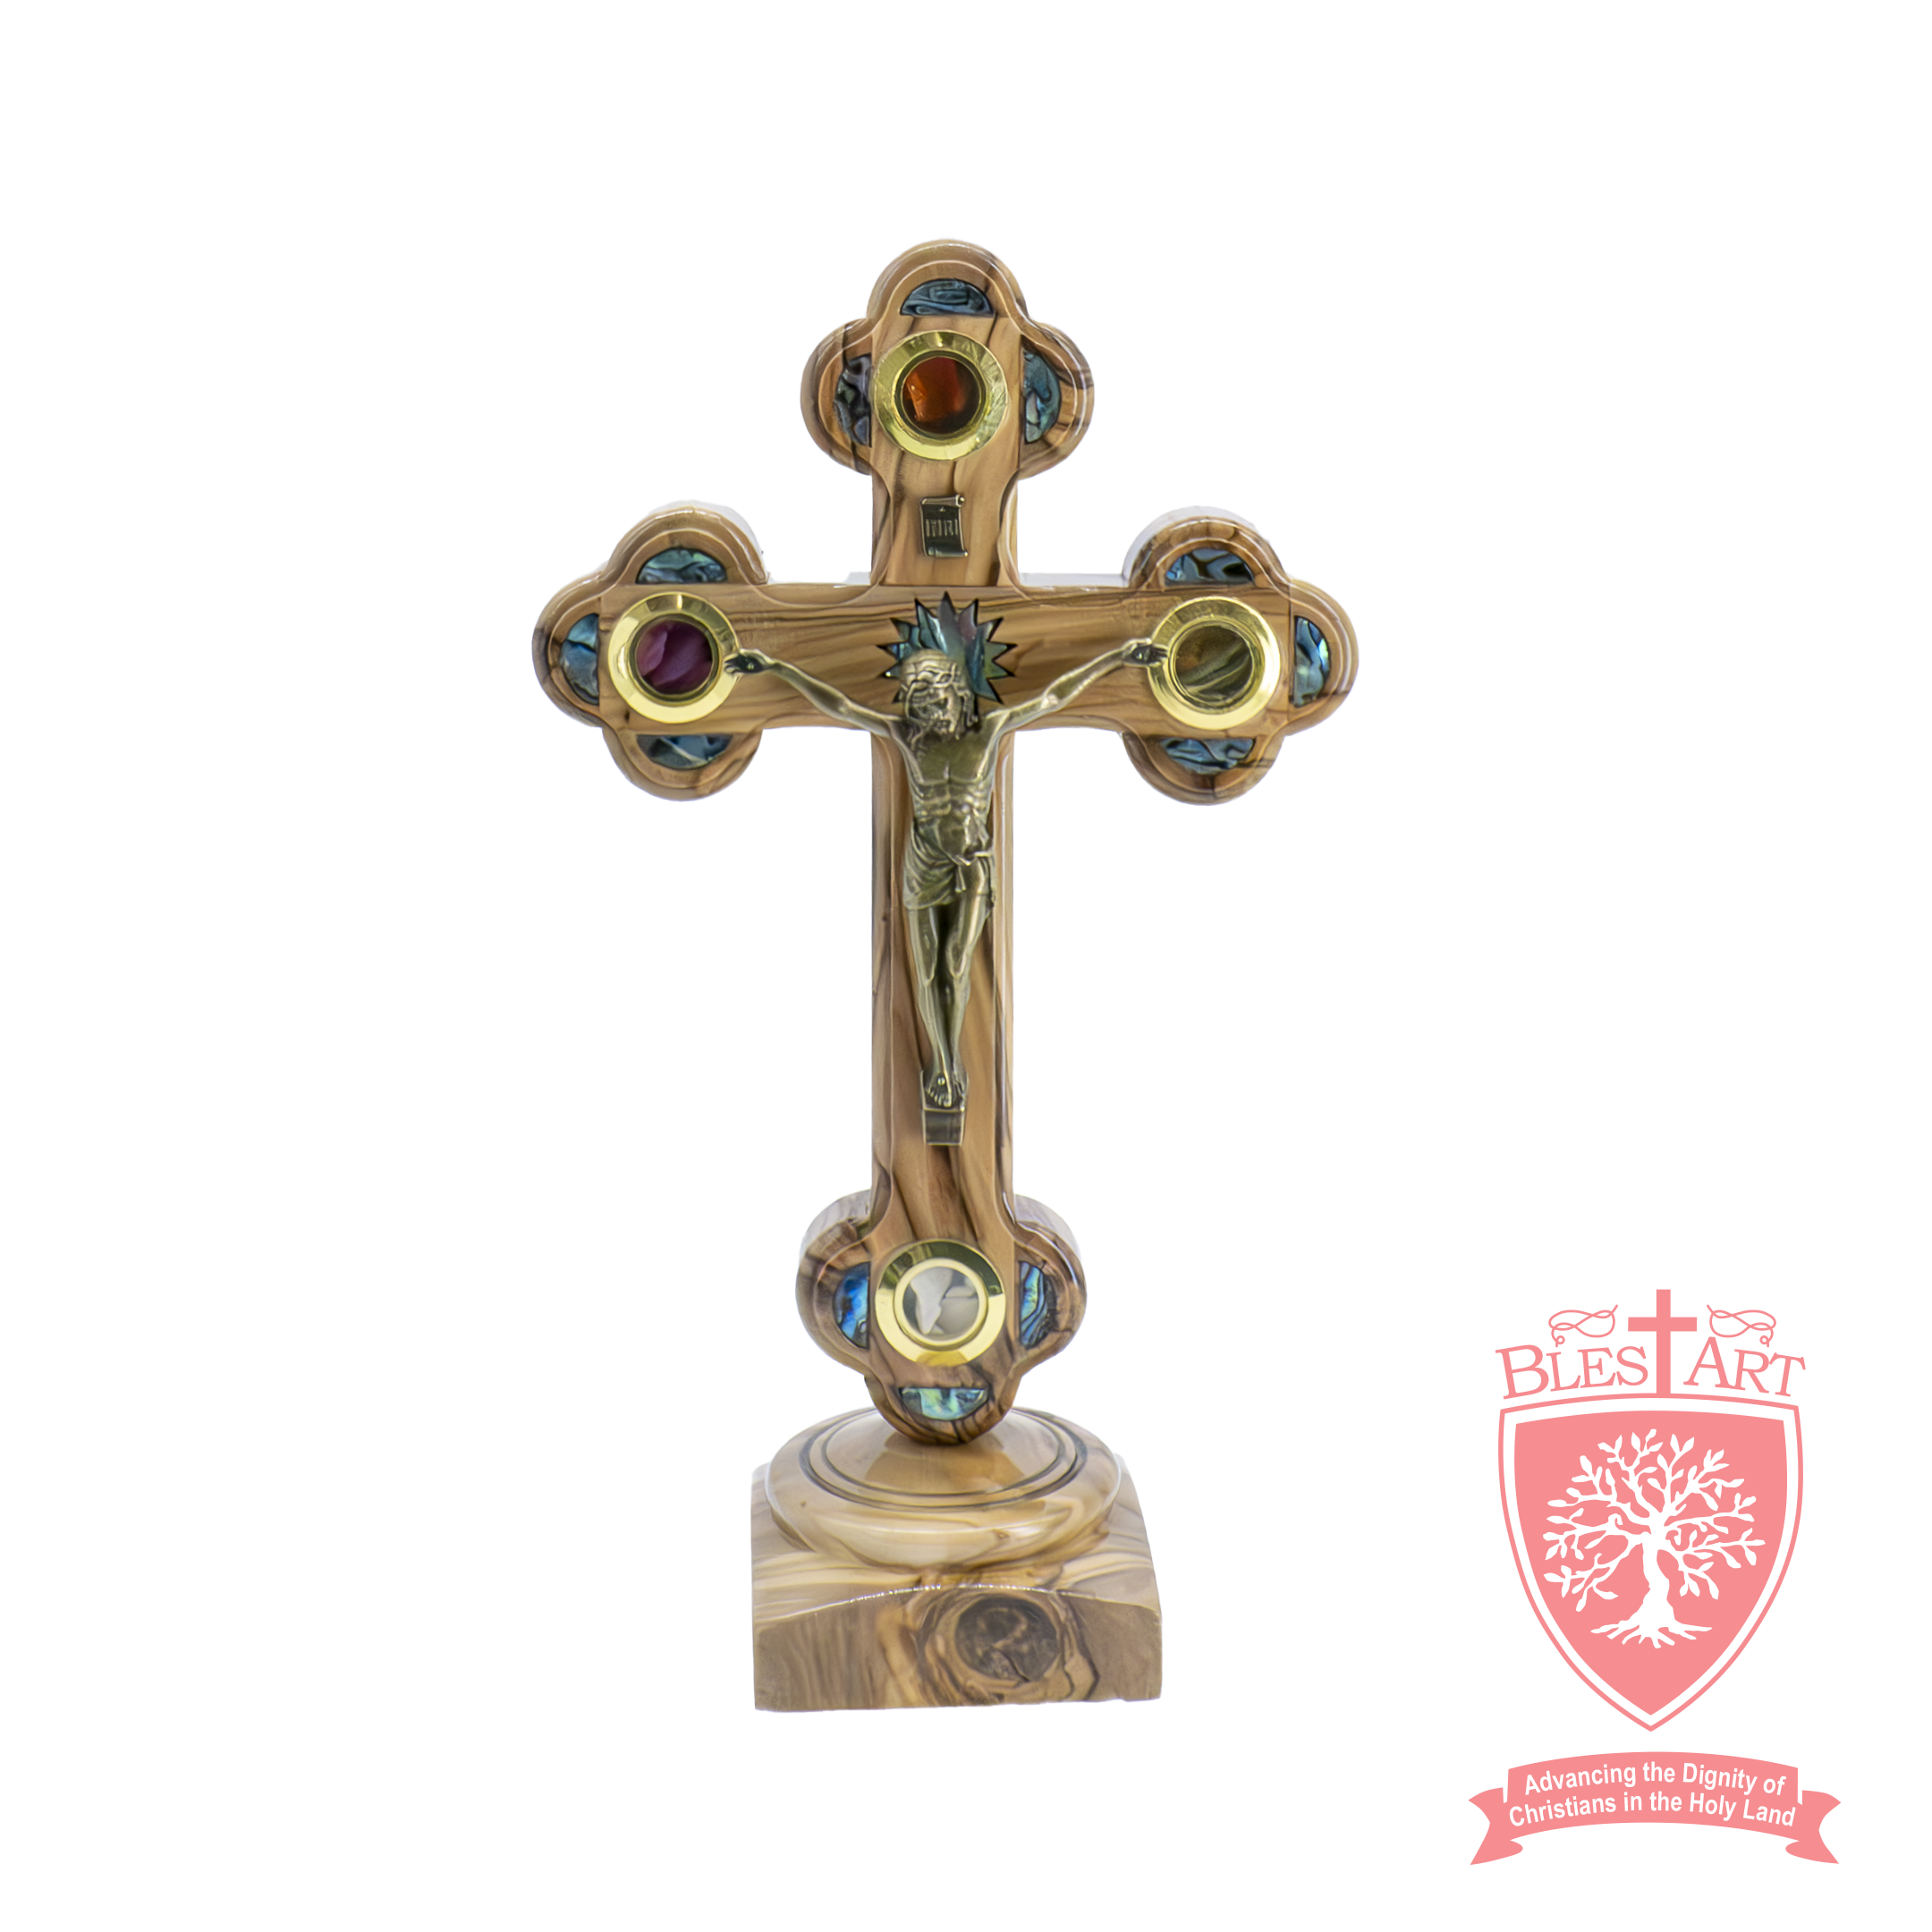 Roman Cross with Abalone Shell on base - Olive Wood